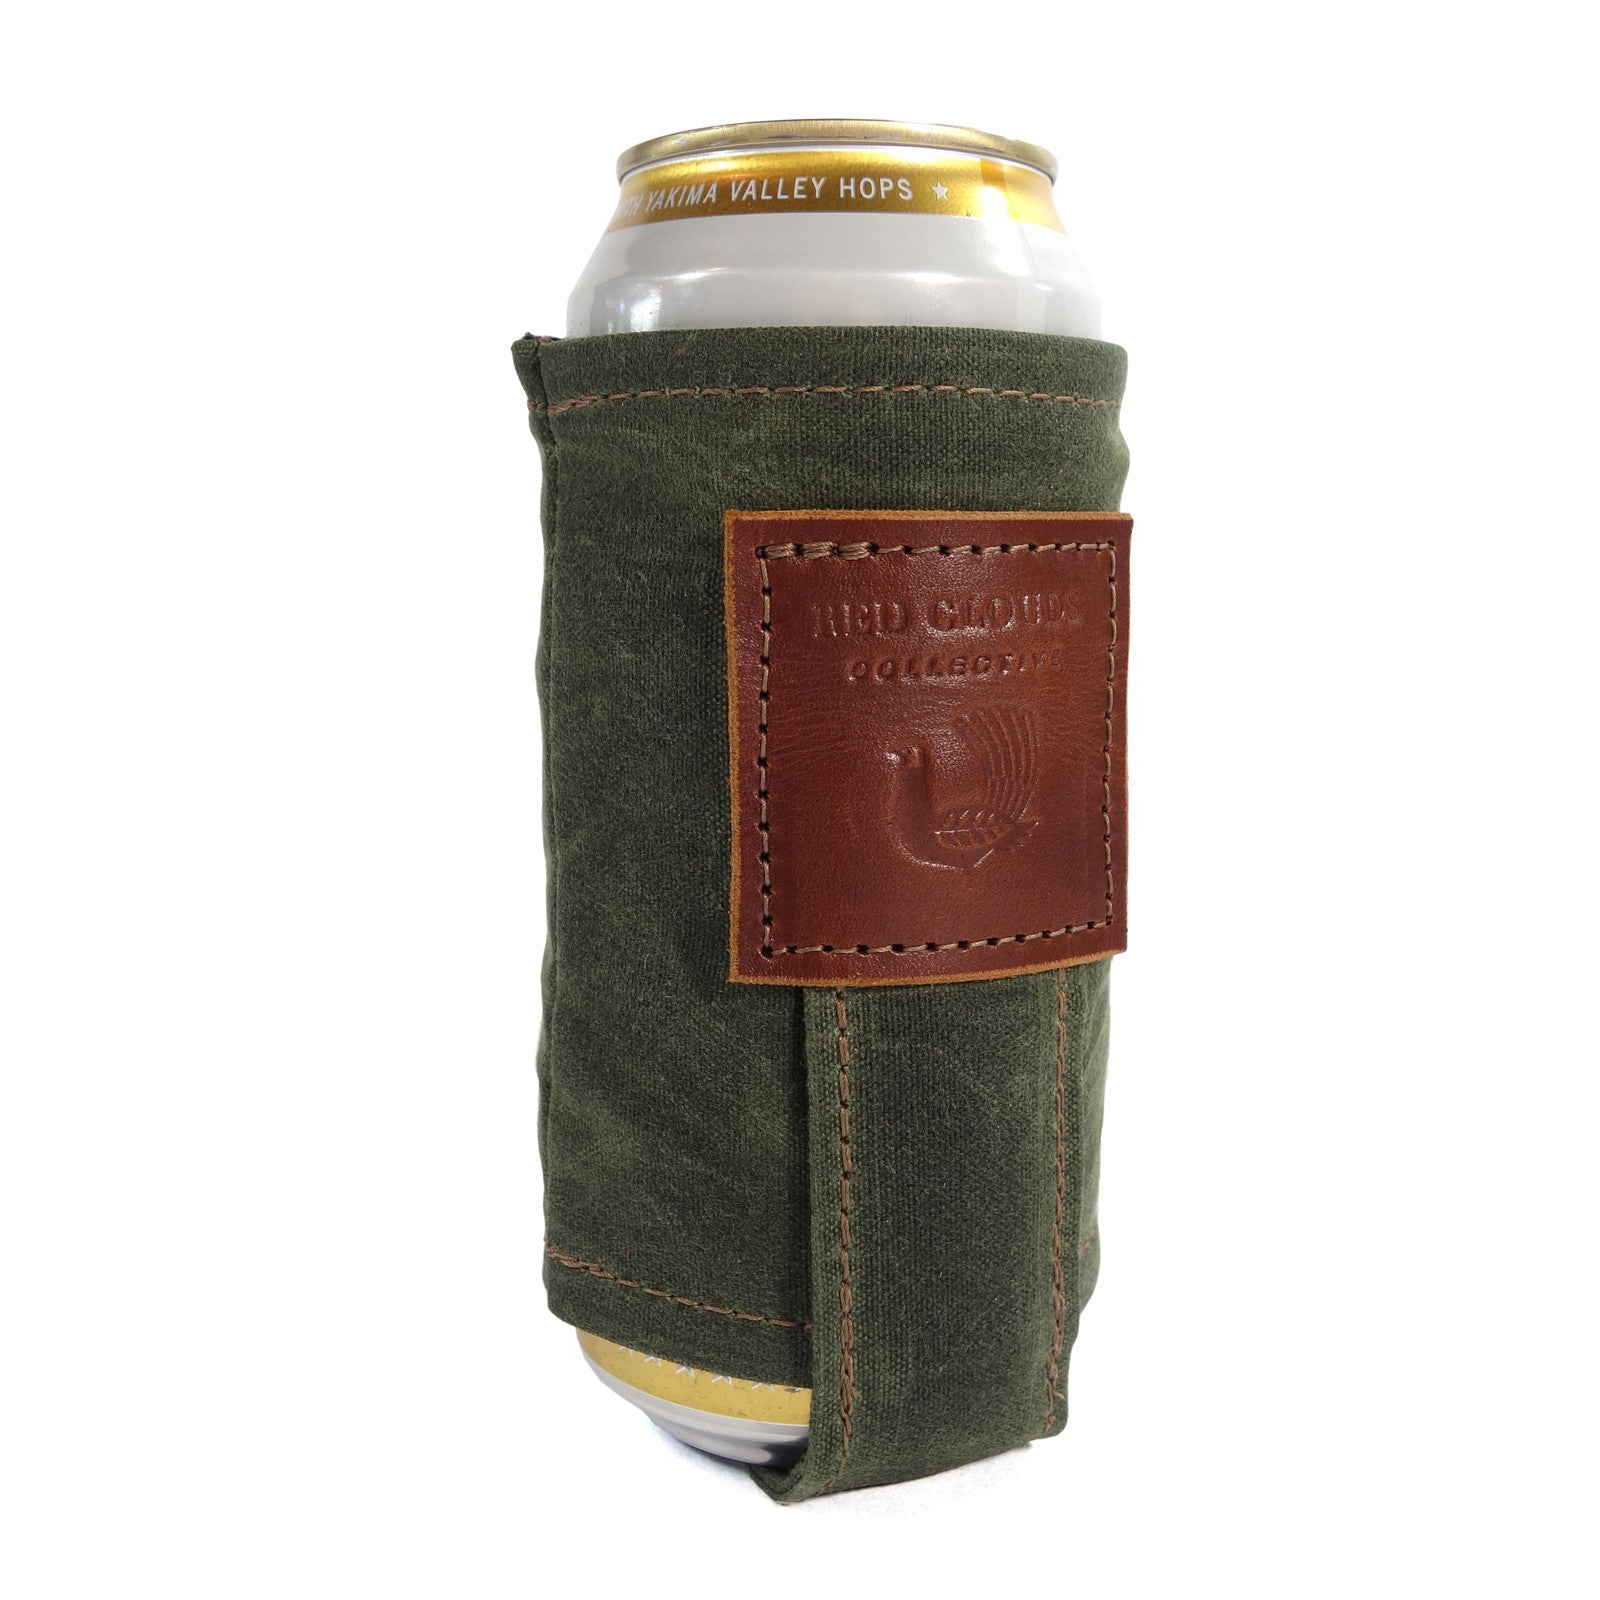 Magnetic Koozie, waxed canvas koozie, leather koozie, rare earth magnets, beer koozie, tallboy koozie, red clouds koozie, This is not your normal koozie. It uses very strong, rare earth magnets to hold the weight of your full beverage attached to the fridge, stove, your car or any other metal surface while you are working or playing. A clever back loop also lets you attach a string and wear the koozie around your neck.